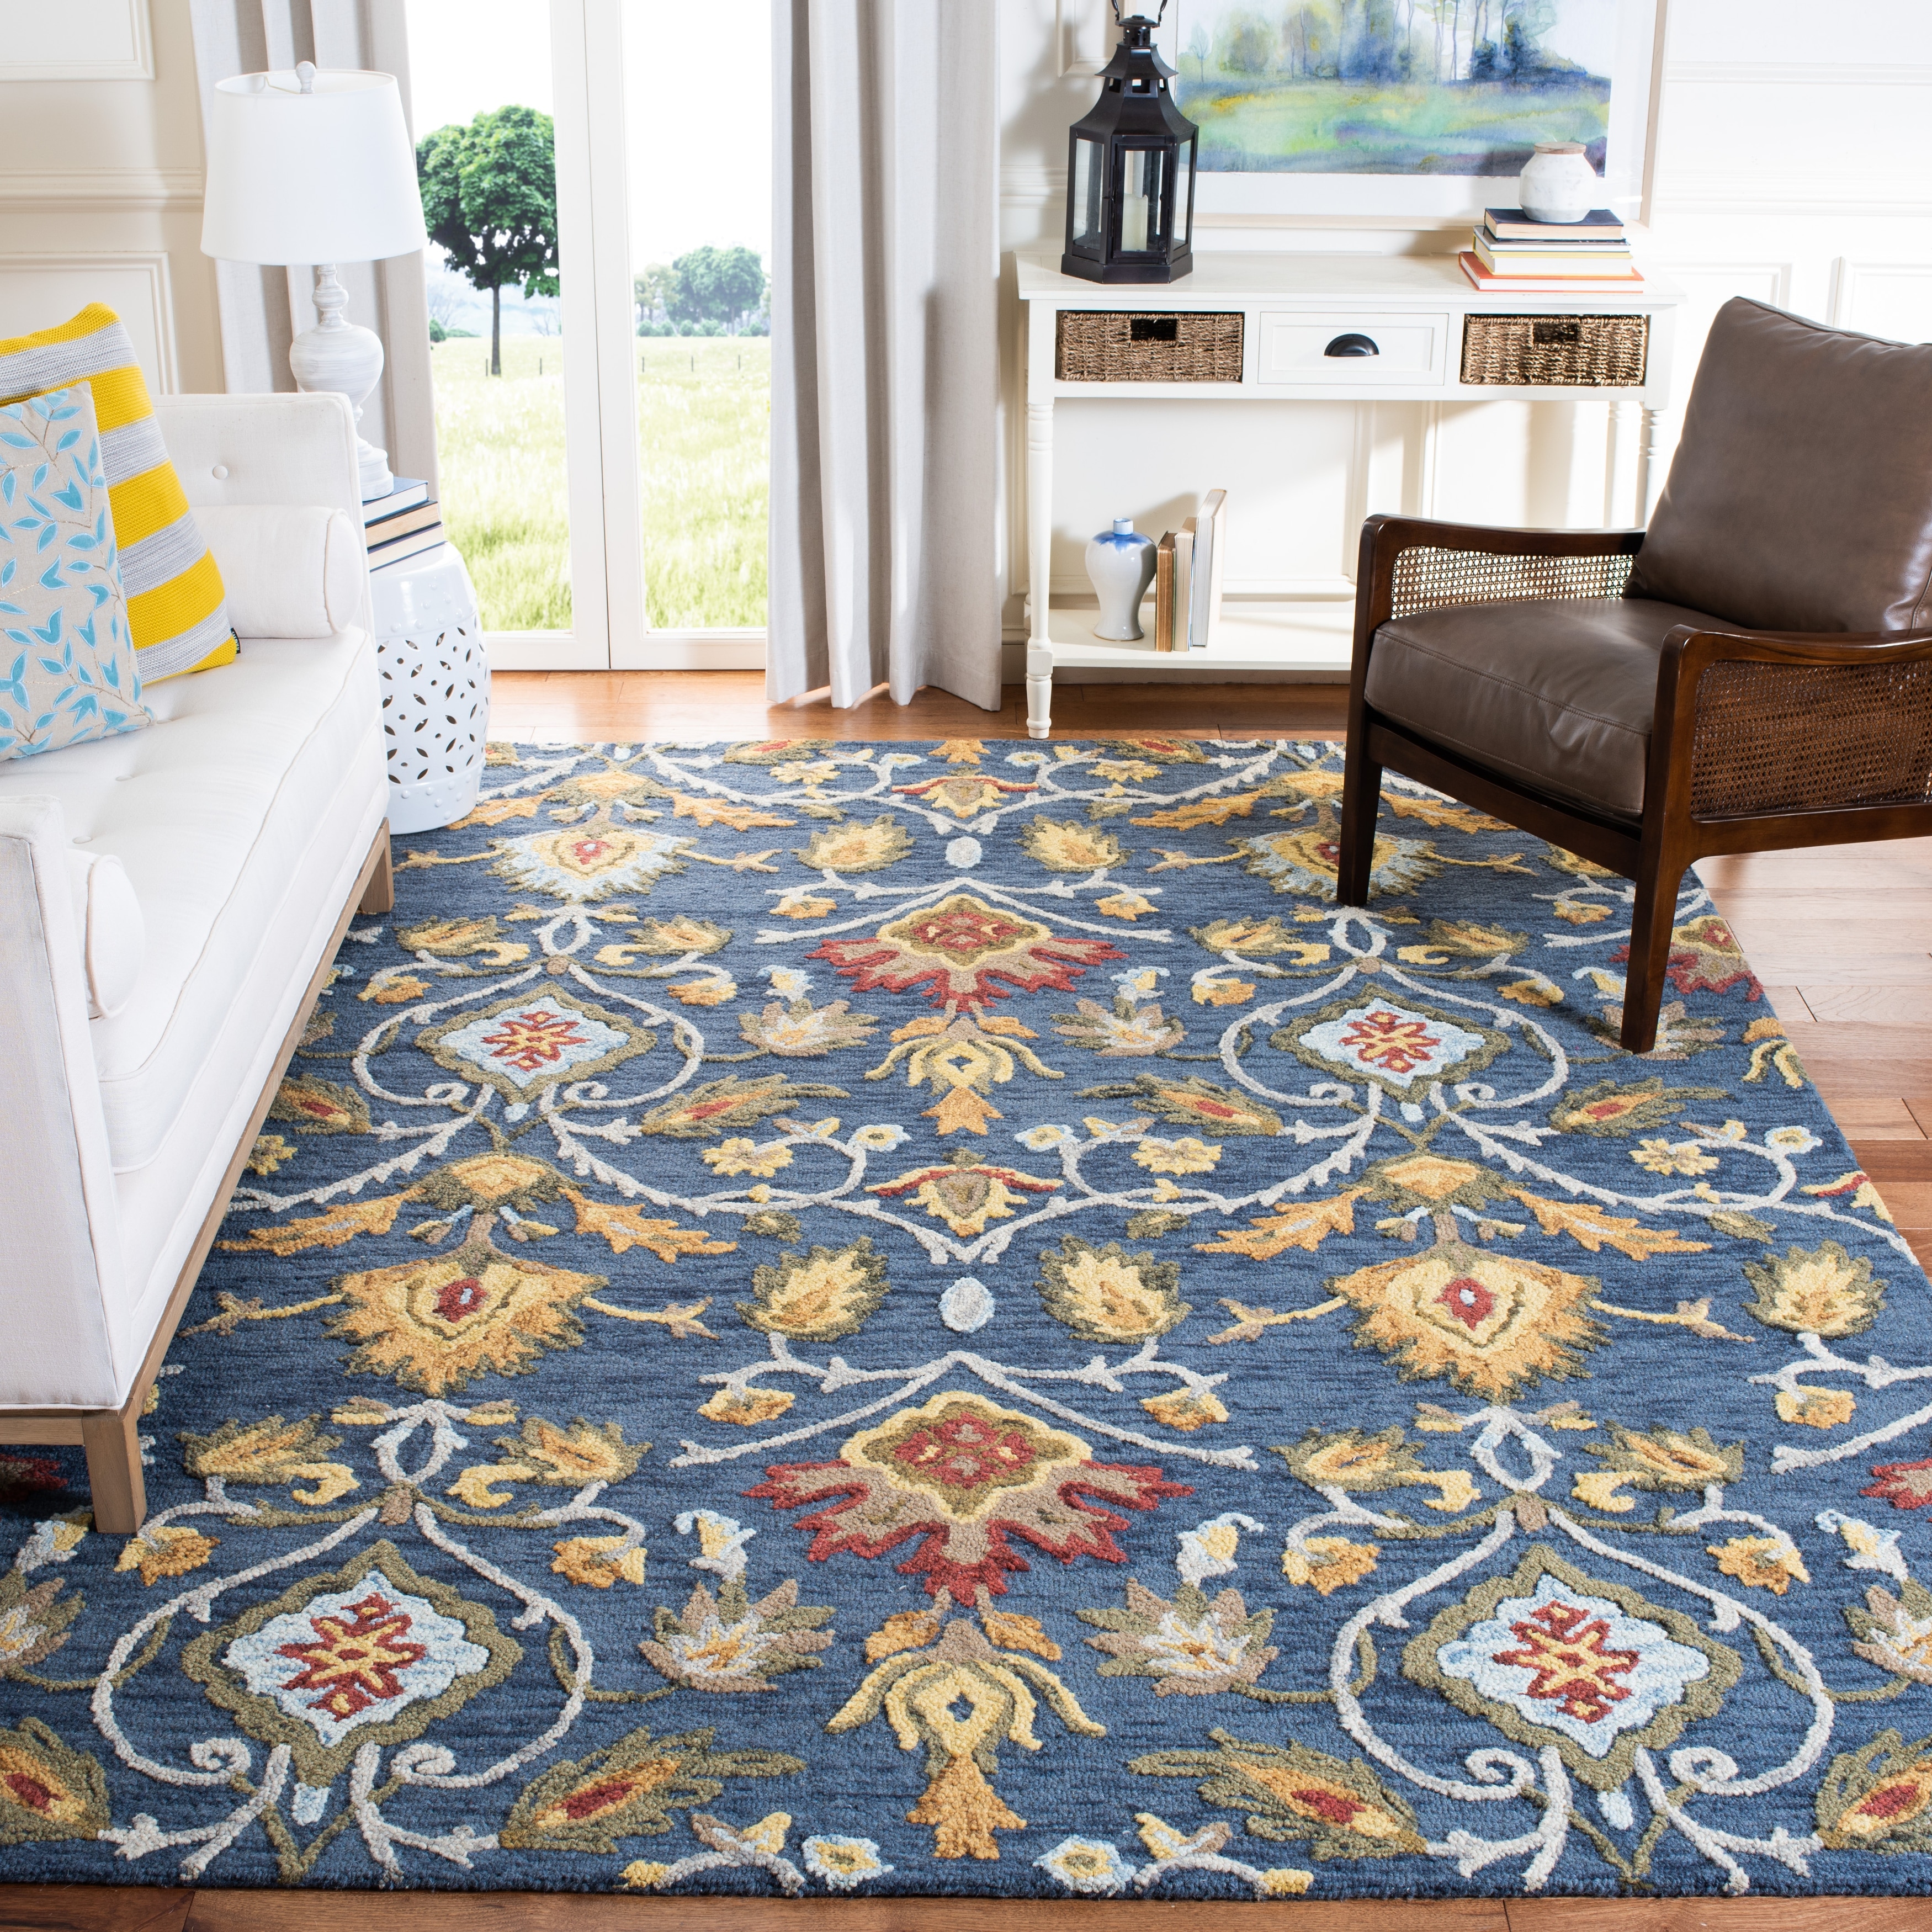 Floral & Botanical Area Rugs - Bed Bath & Beyond